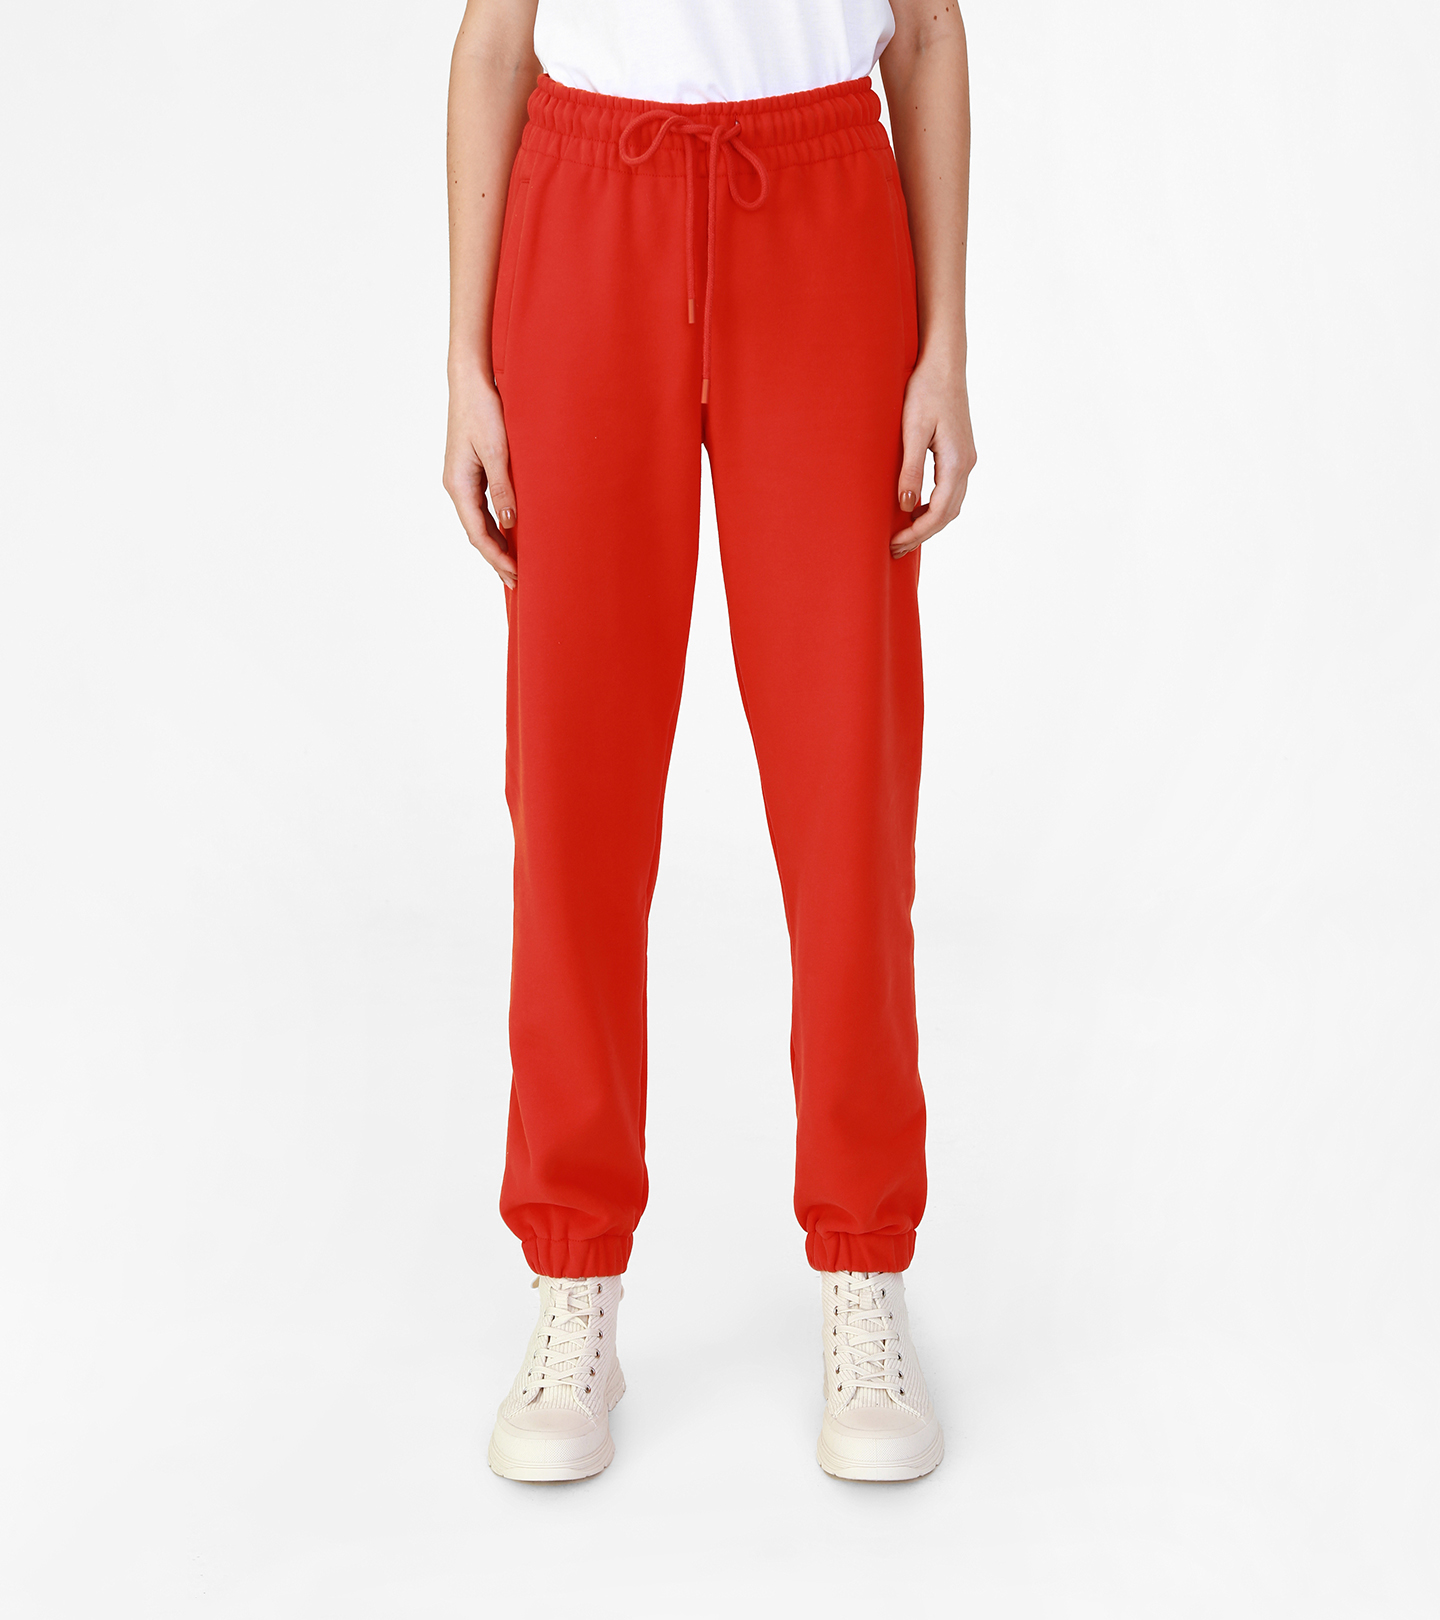 TRACK PANTS RED (WOMEN) - 1